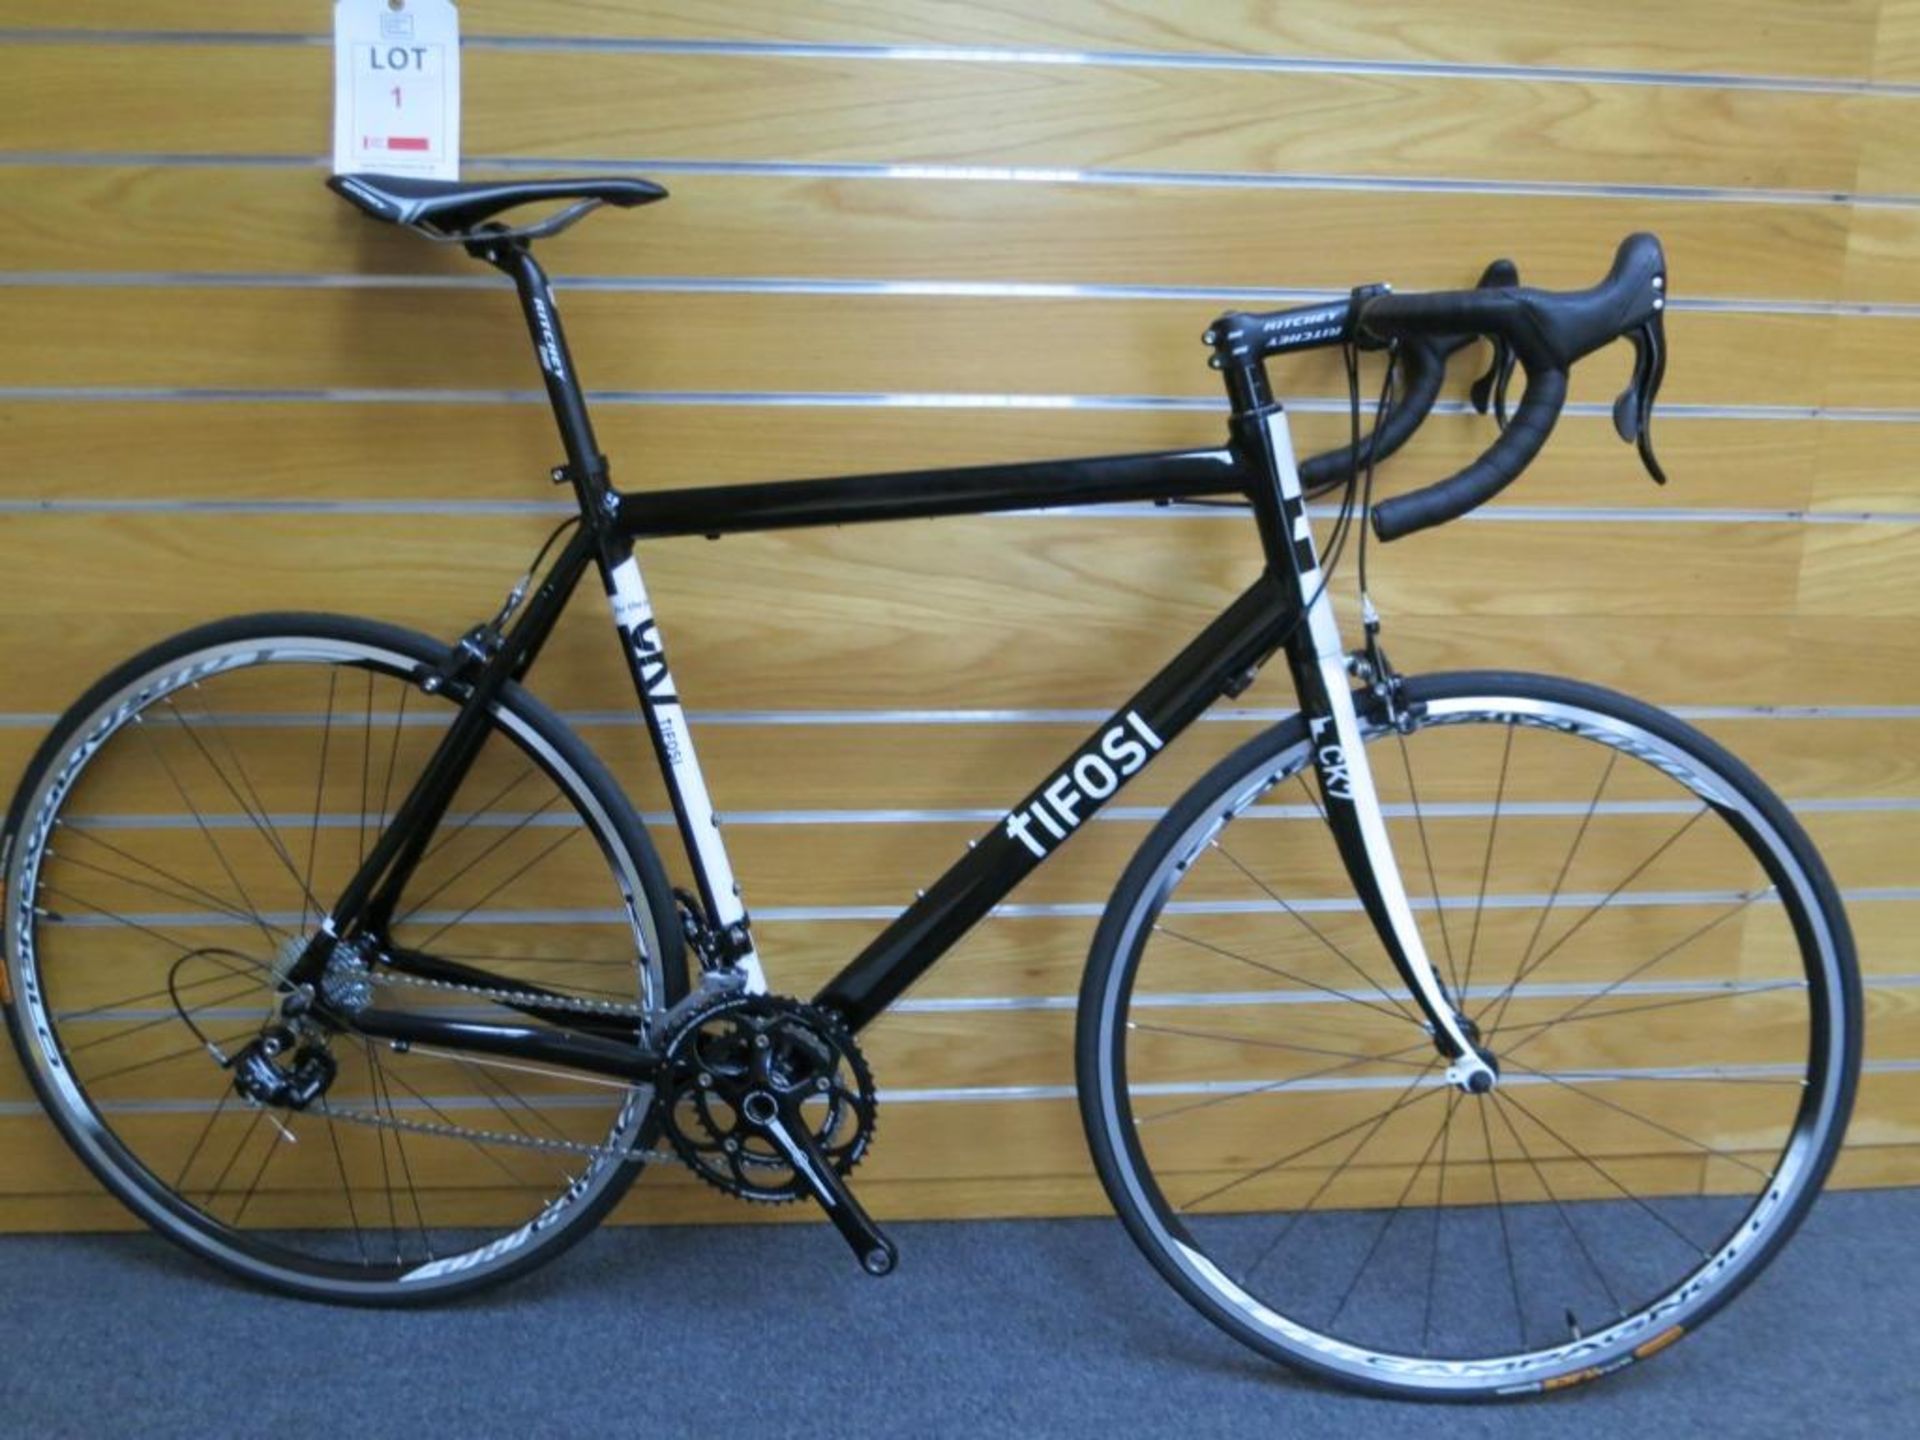 Tifossi CK7/ Veloce Large Bicycle SRP £1,150, Size Large- Seat Tube 52cm, Top Tube 57cm, TFX